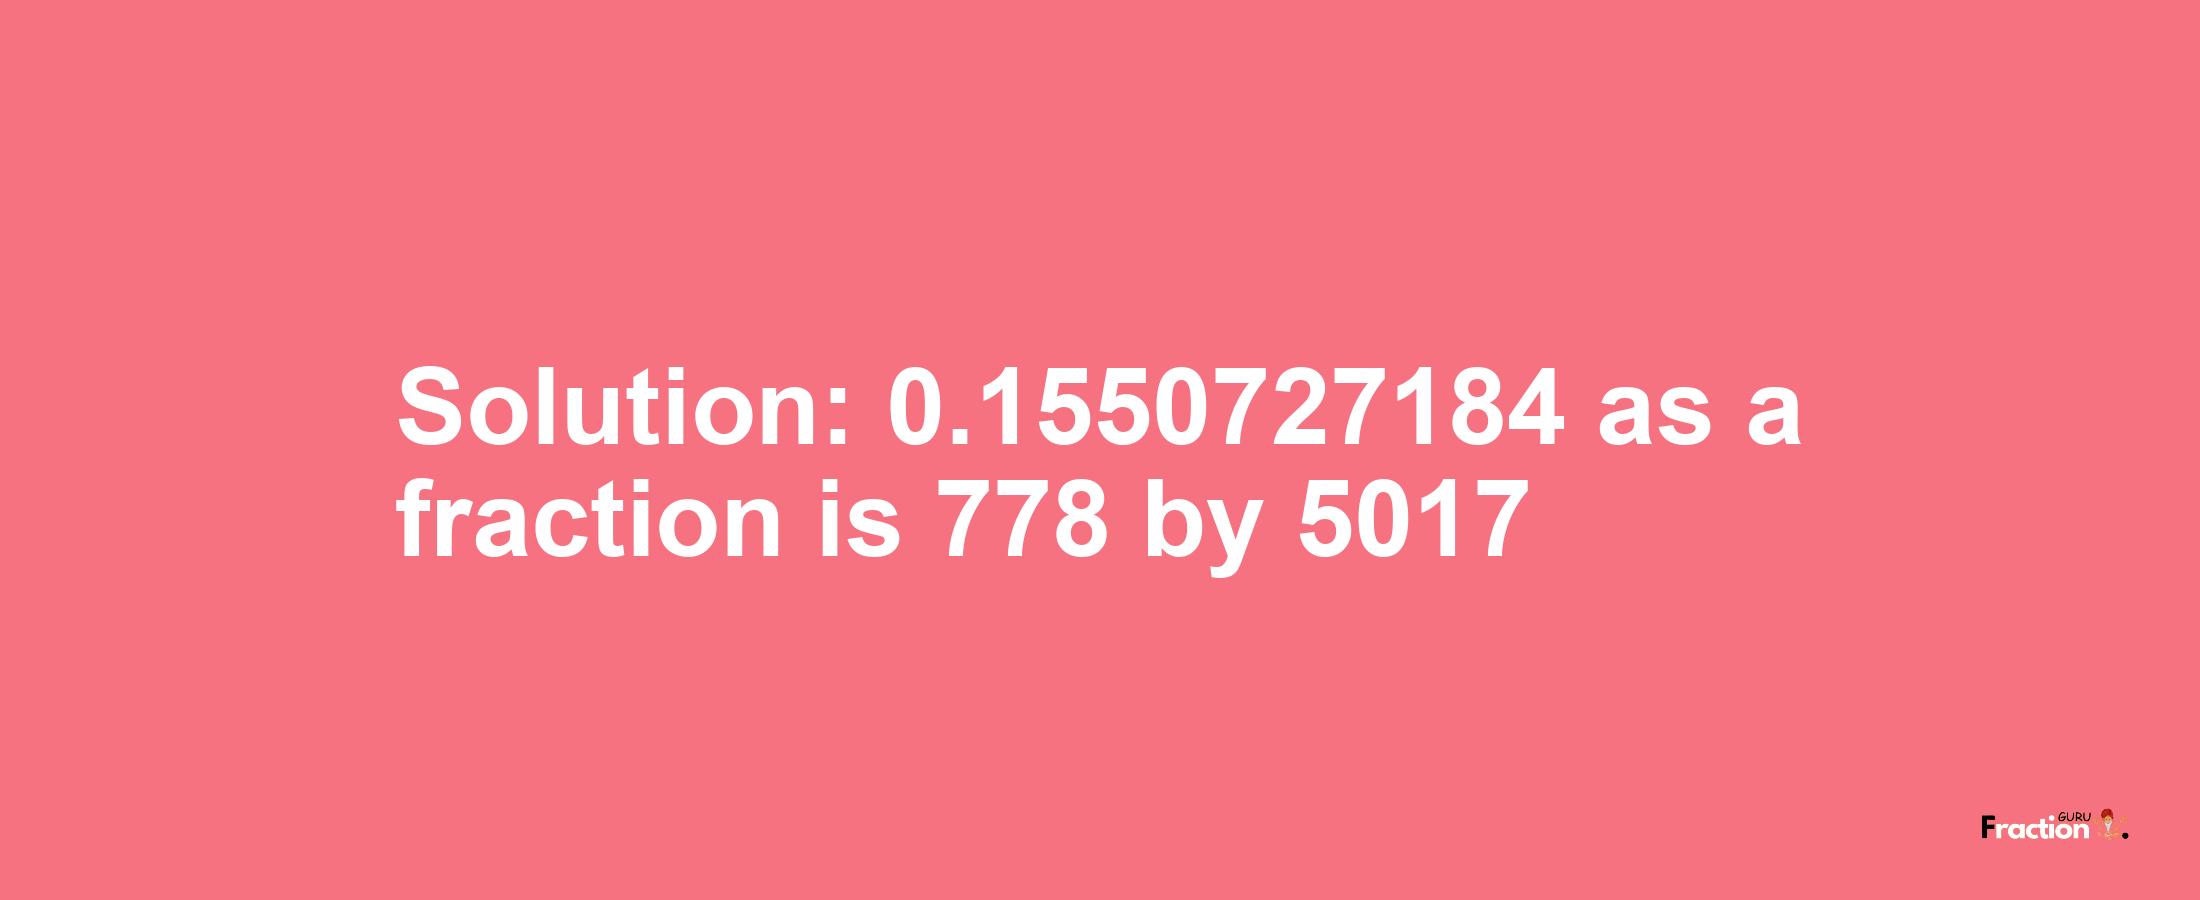 Solution:0.1550727184 as a fraction is 778/5017